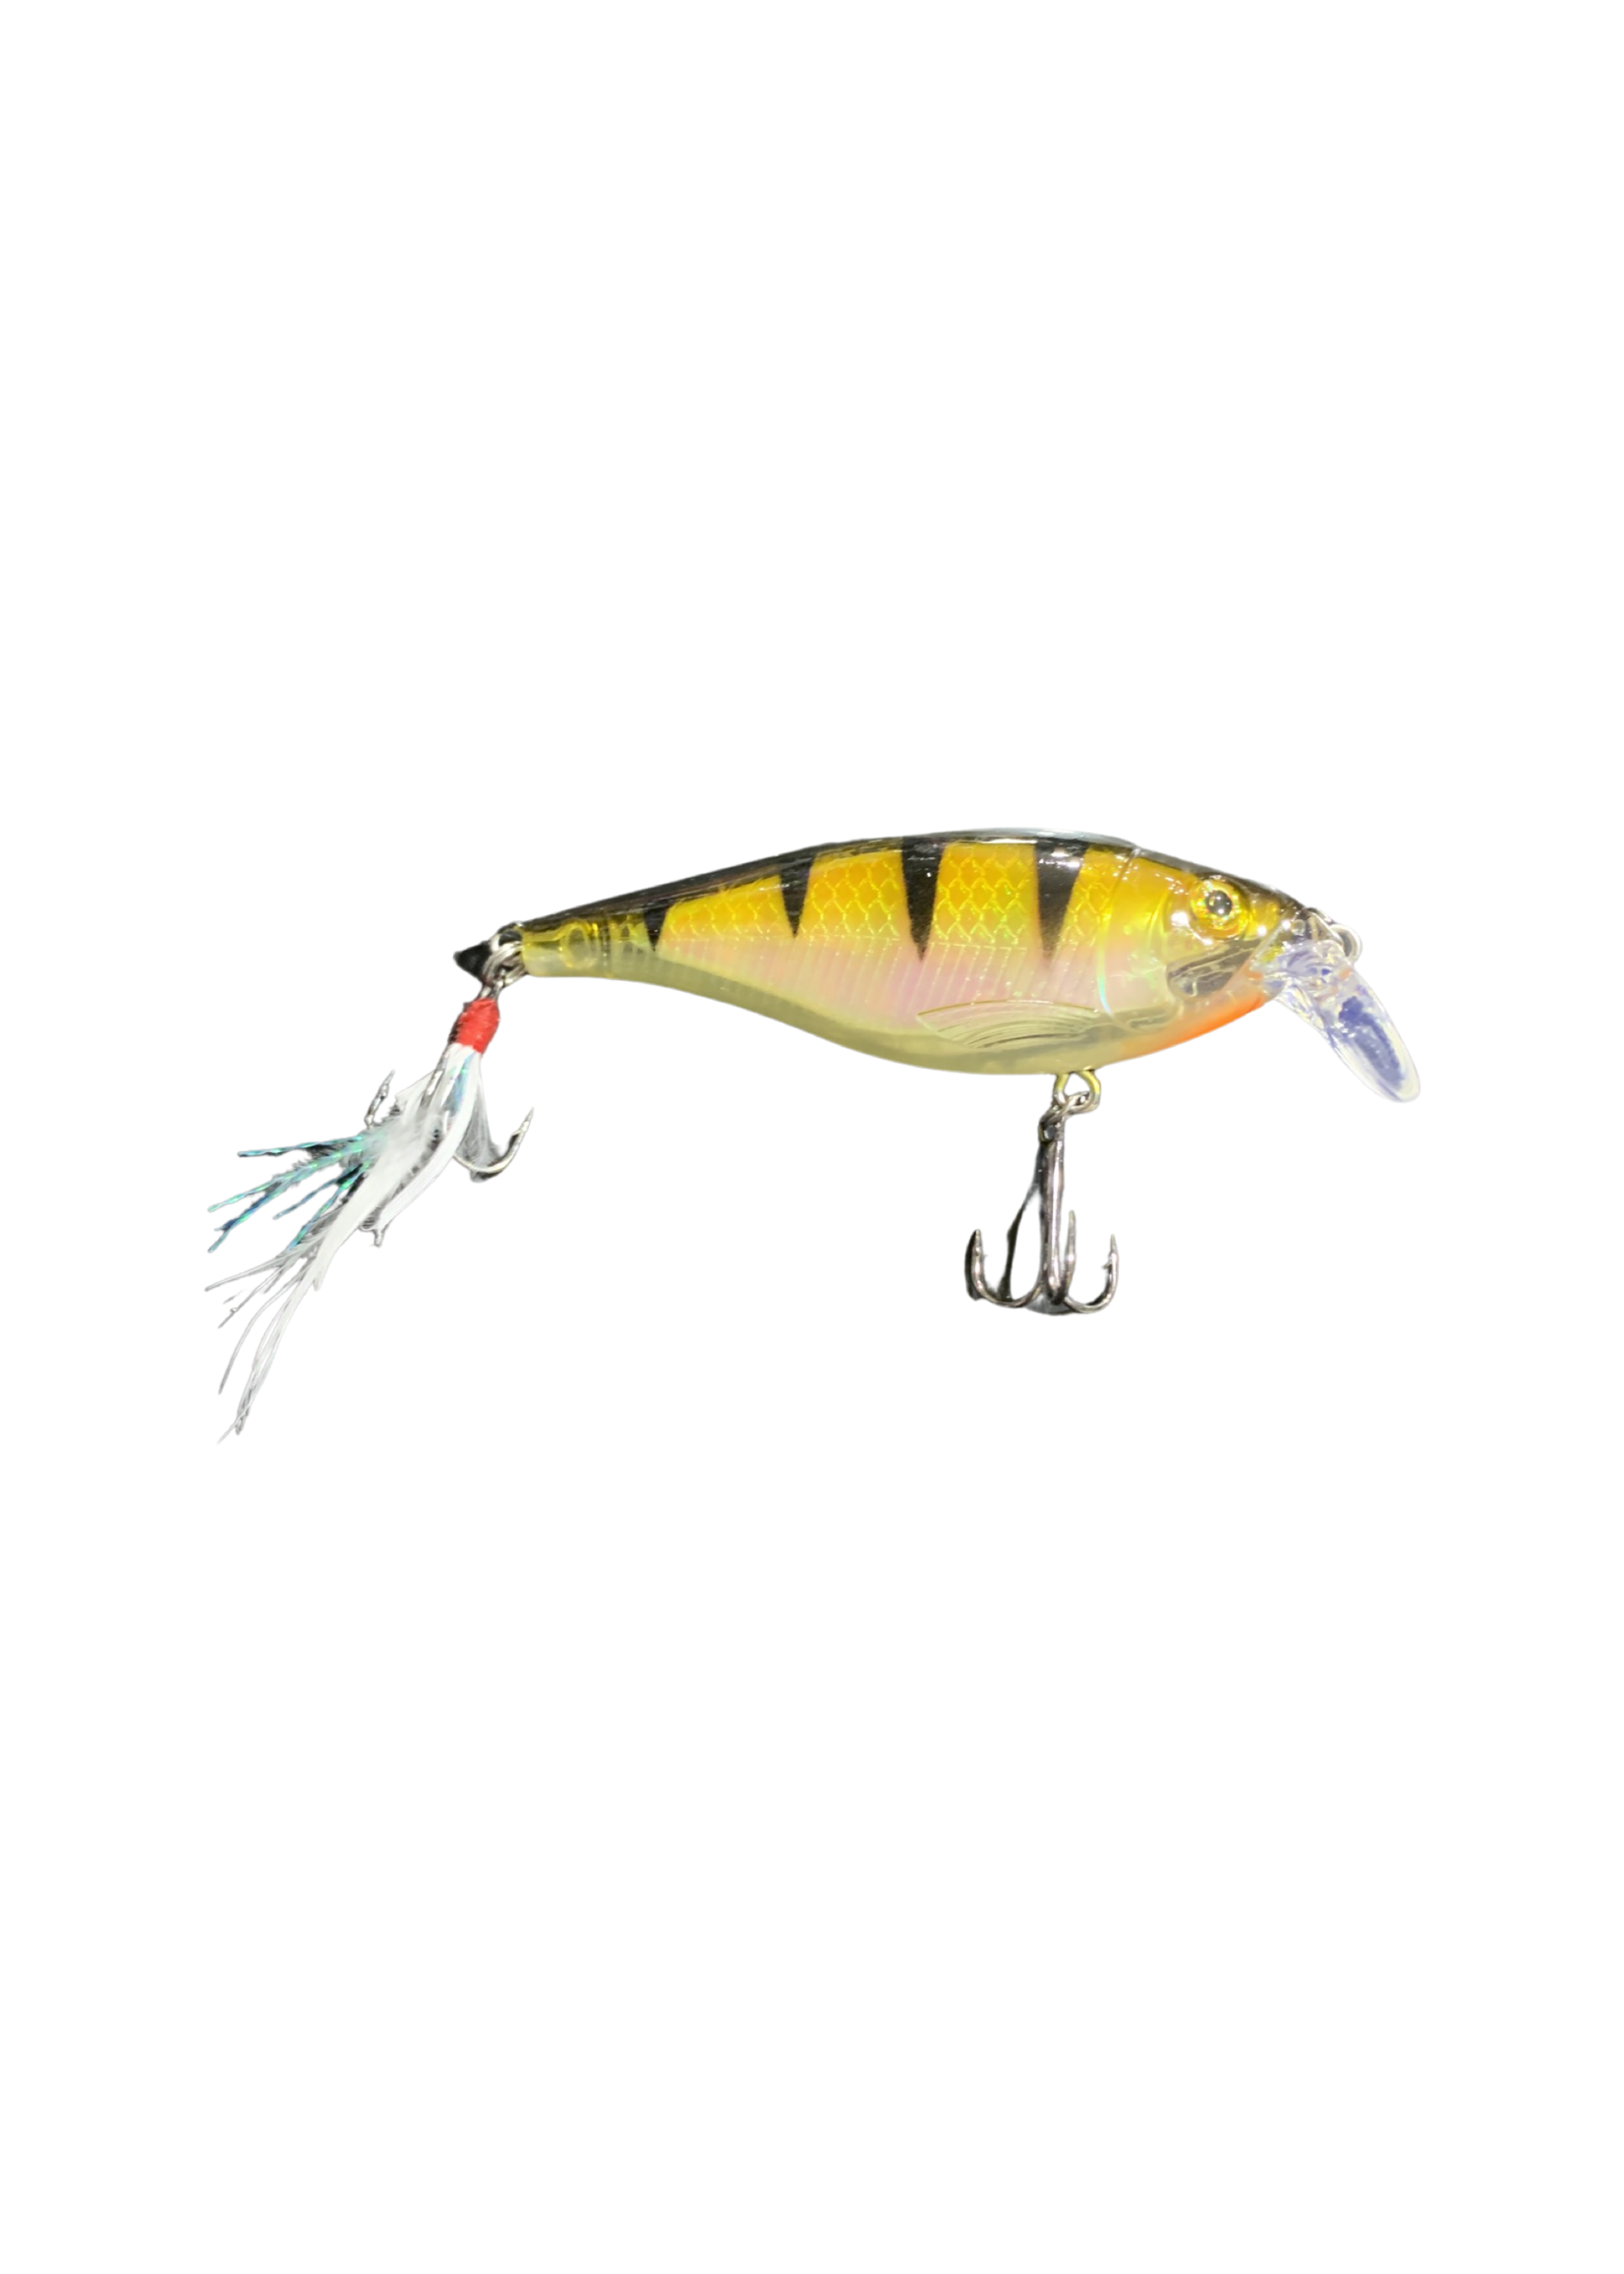 Catch em Big Lures Catch em Big Lures Feathered Jerkbait Walleye Rattlers Series